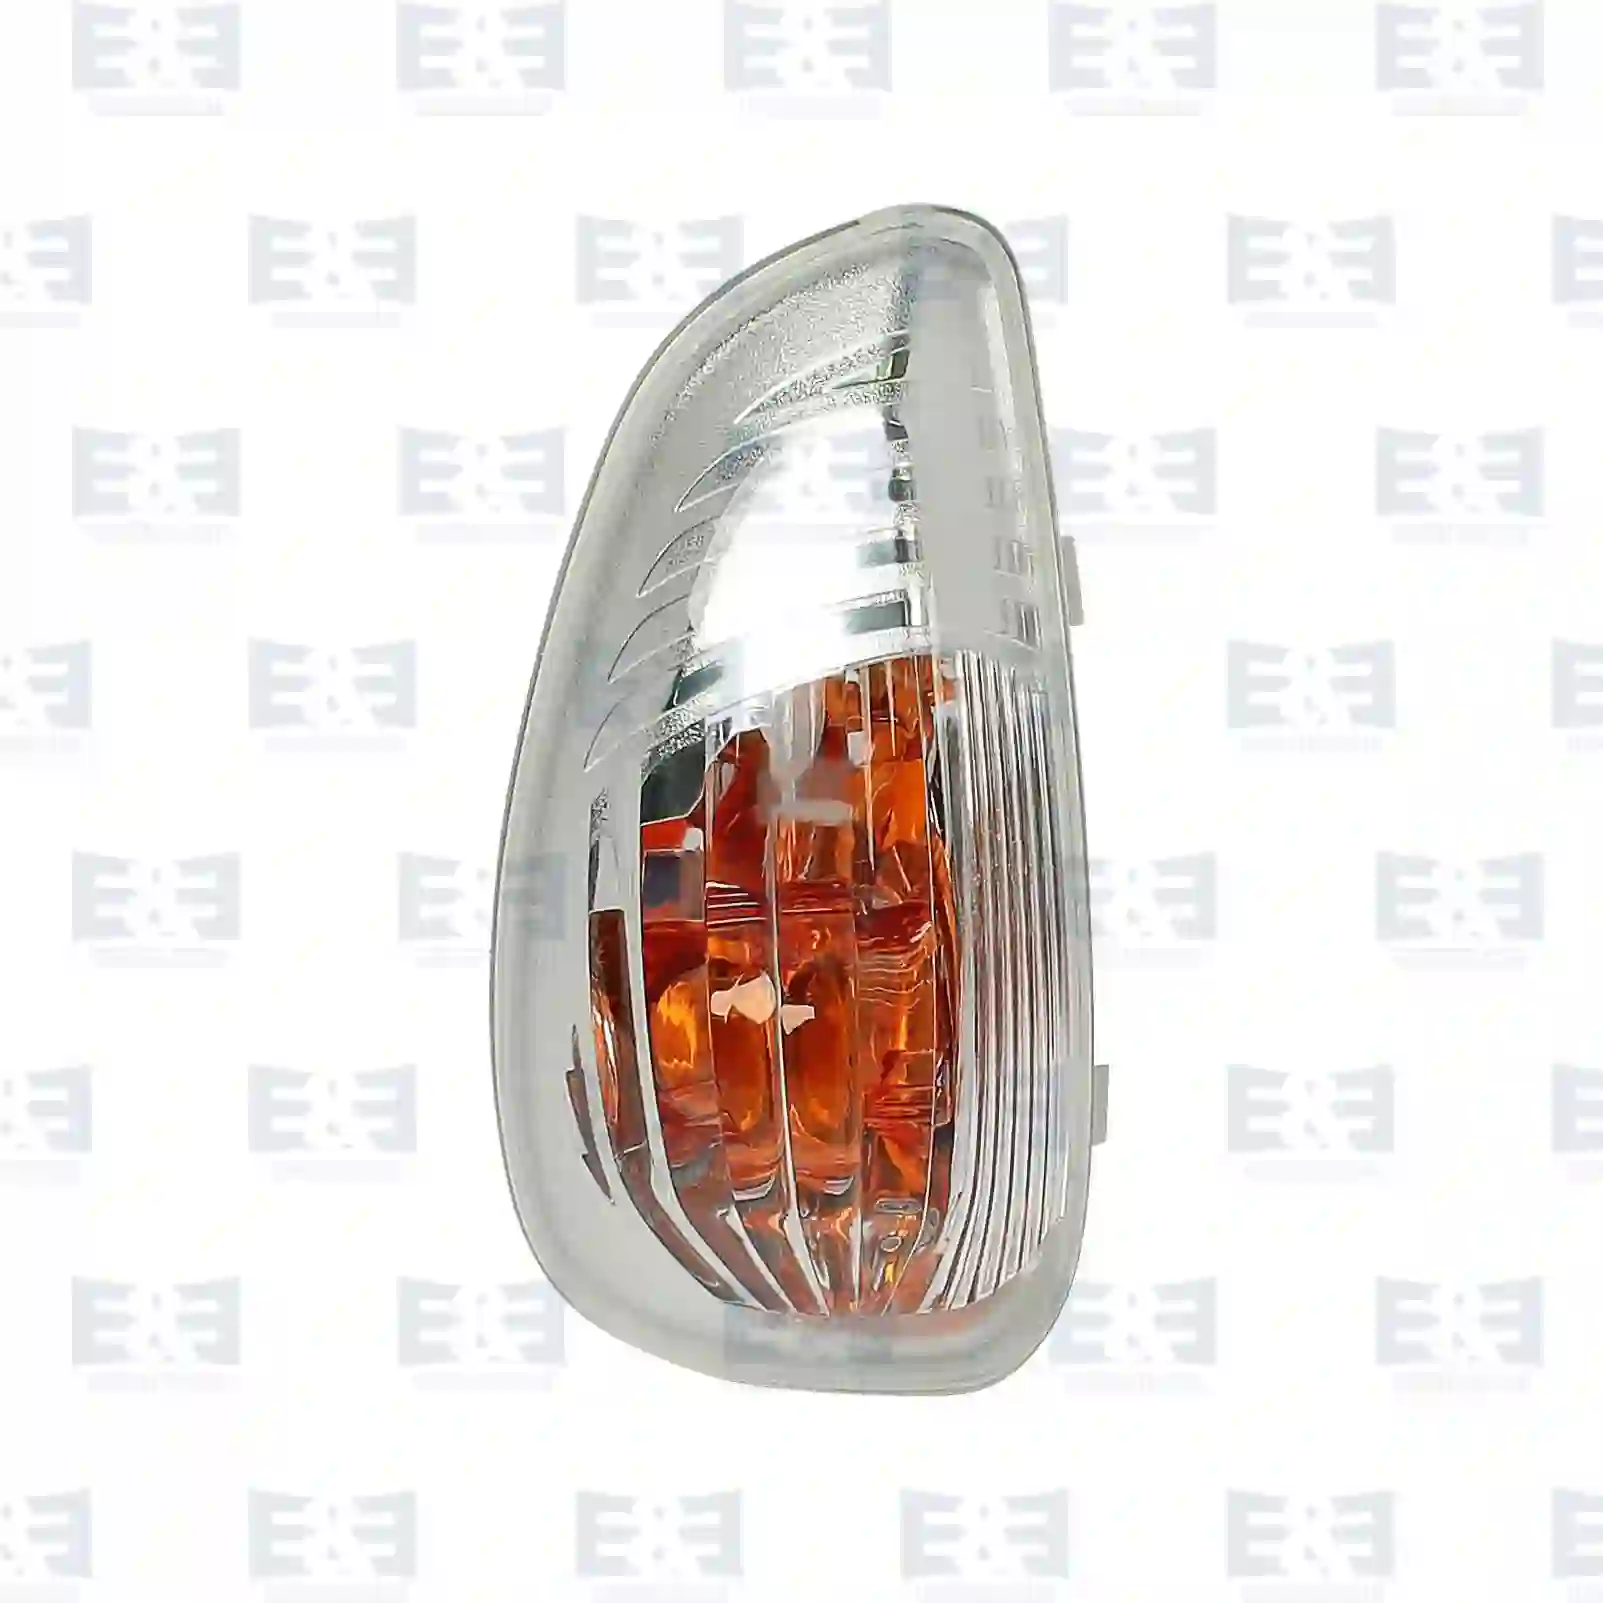 Turn signal lamp, left, without lamp socket, 2E2298712, 95508975, 4405992, 261652475R, 7485120622, ZG21201-0008 ||  2E2298712 E&E Truck Spare Parts | Truck Spare Parts, Auotomotive Spare Parts Turn signal lamp, left, without lamp socket, 2E2298712, 95508975, 4405992, 261652475R, 7485120622, ZG21201-0008 ||  2E2298712 E&E Truck Spare Parts | Truck Spare Parts, Auotomotive Spare Parts